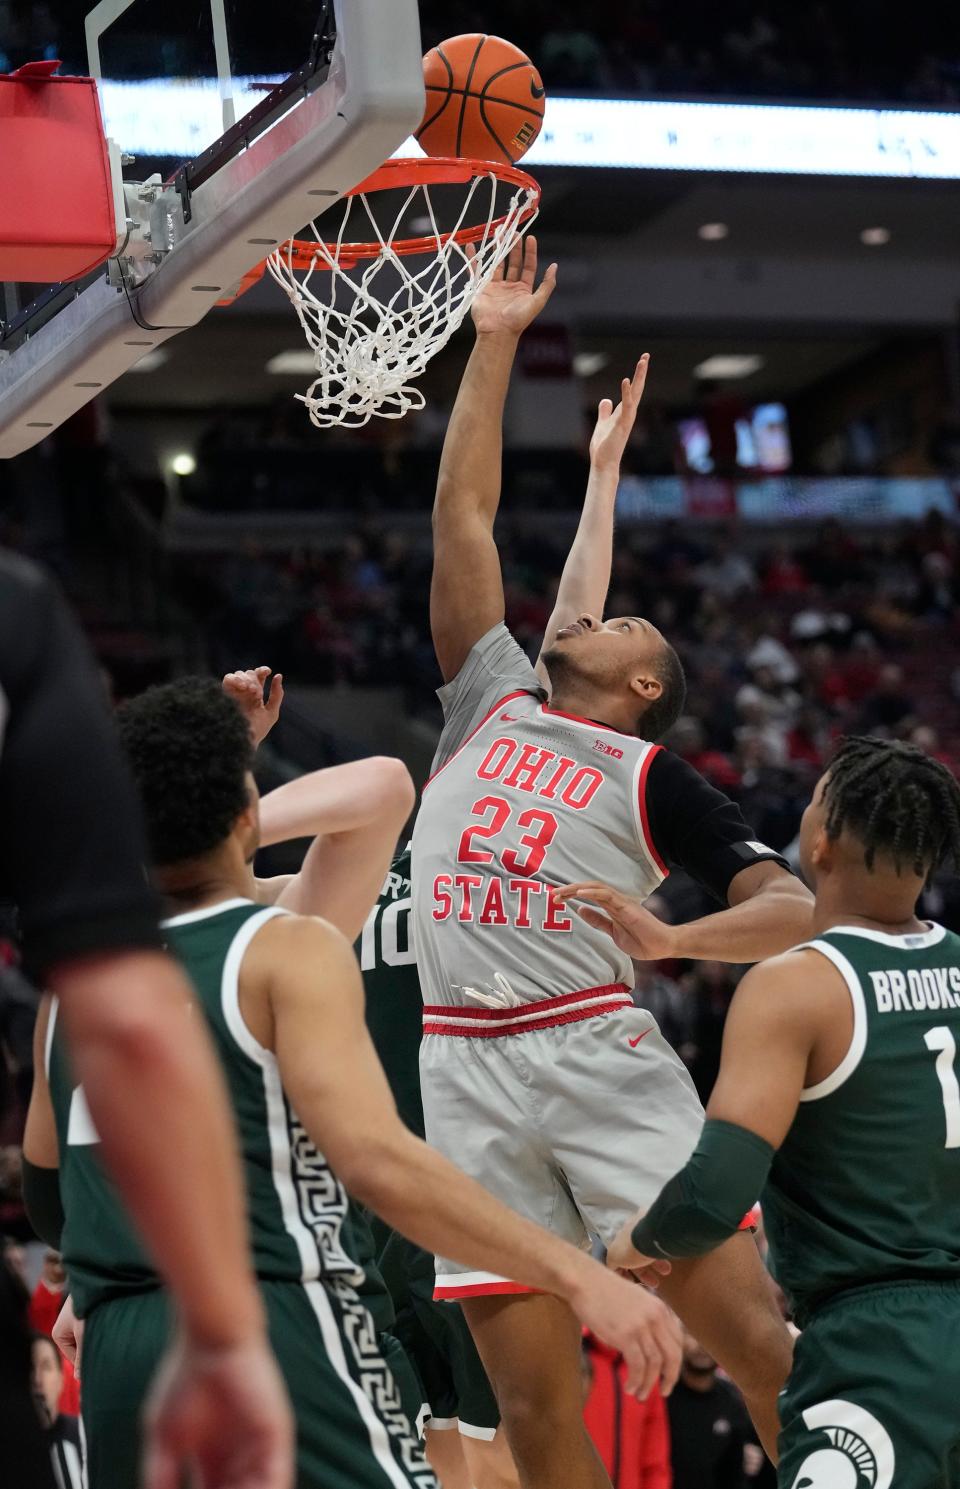 Feb 12, 2023; Columbus, OH, USA; Ohio State Buckeyes forward Zed Key (23) attempts a layup in the second half of their NCAA Mens Division I Basketball Game at Value City Arena. Mandatory Credit: Brooke LaValley/Columbus Dispatch